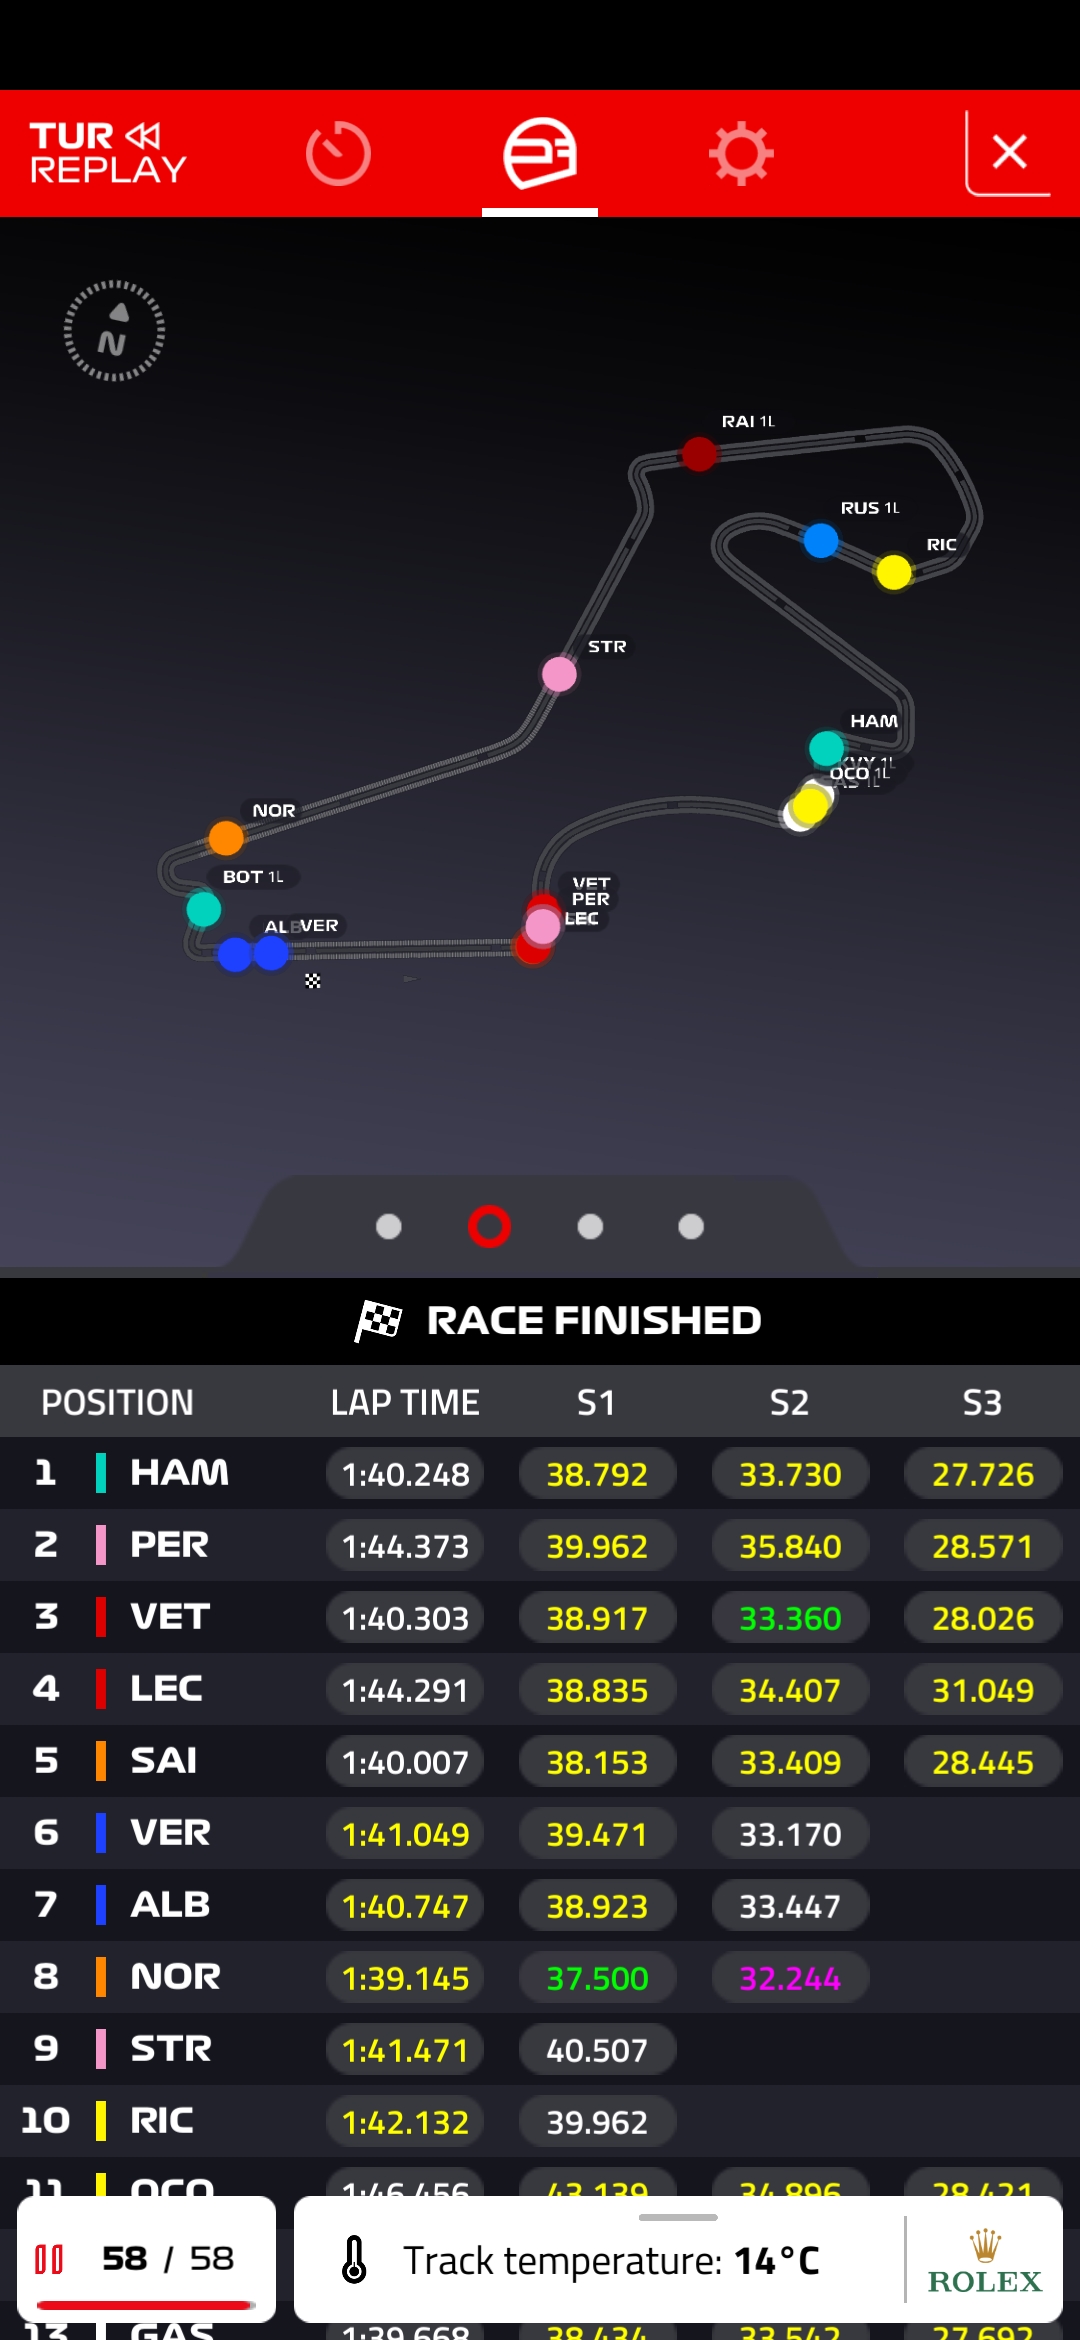 A good website to follow the race and the lap times